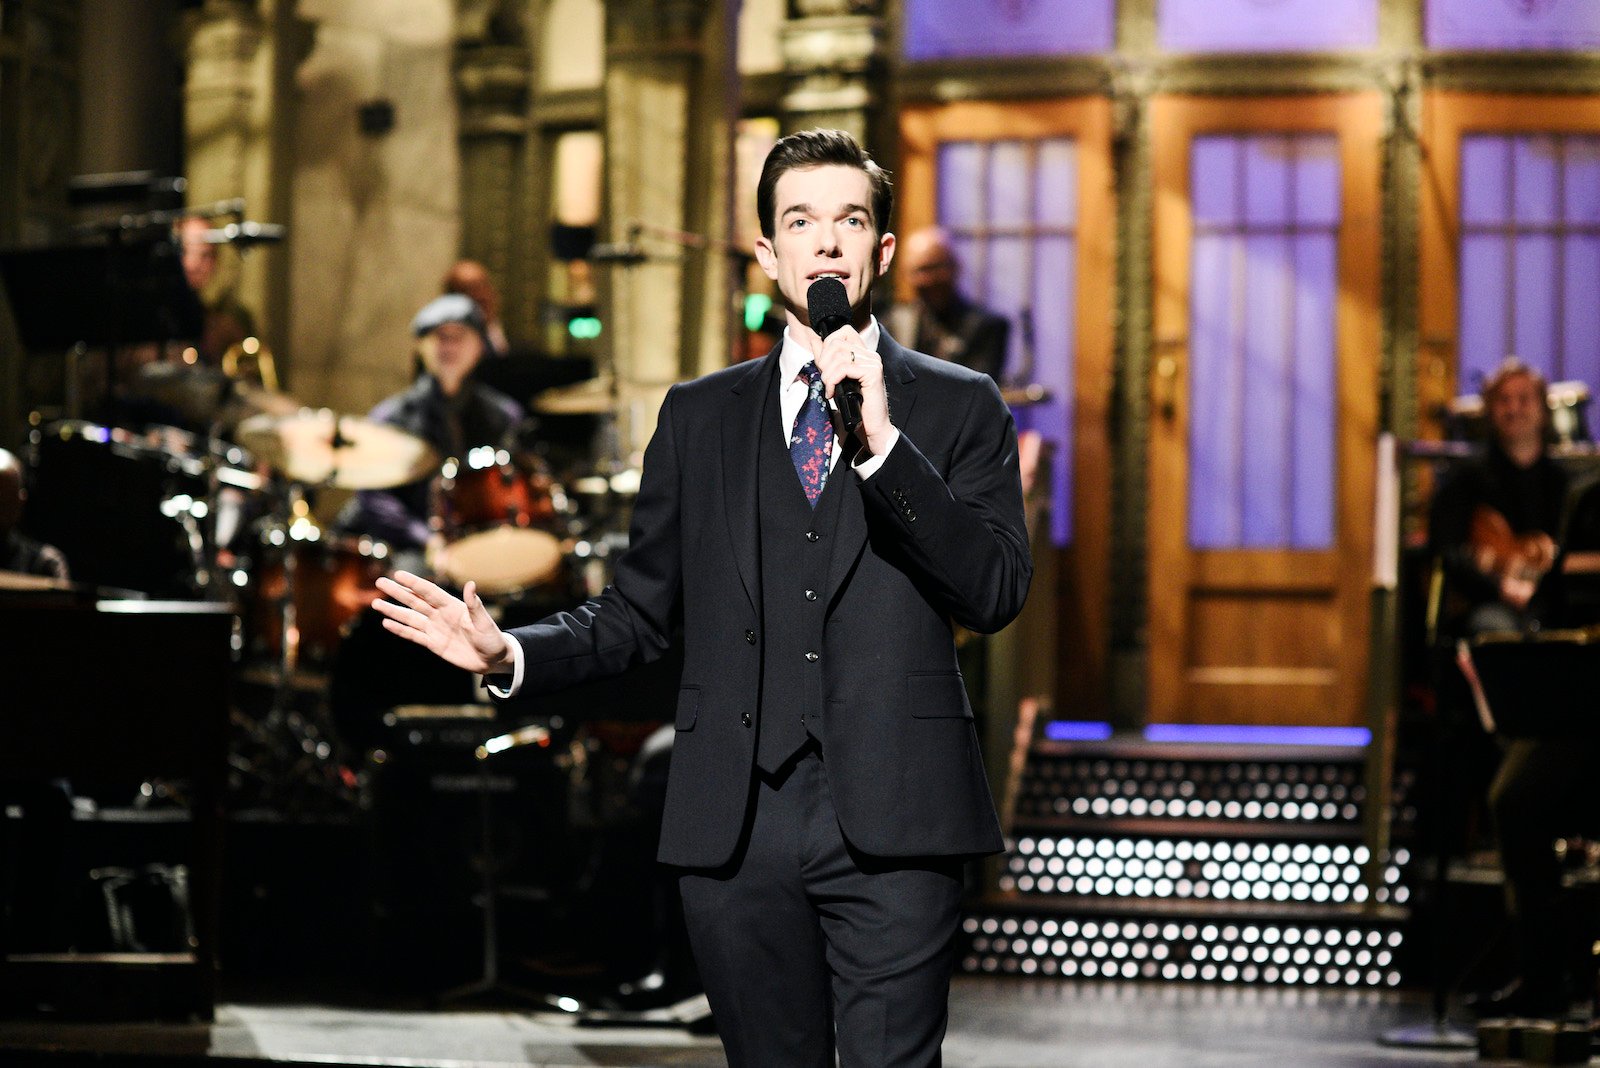 John Mulaney does his standup monologue on 'SNL' in 2018